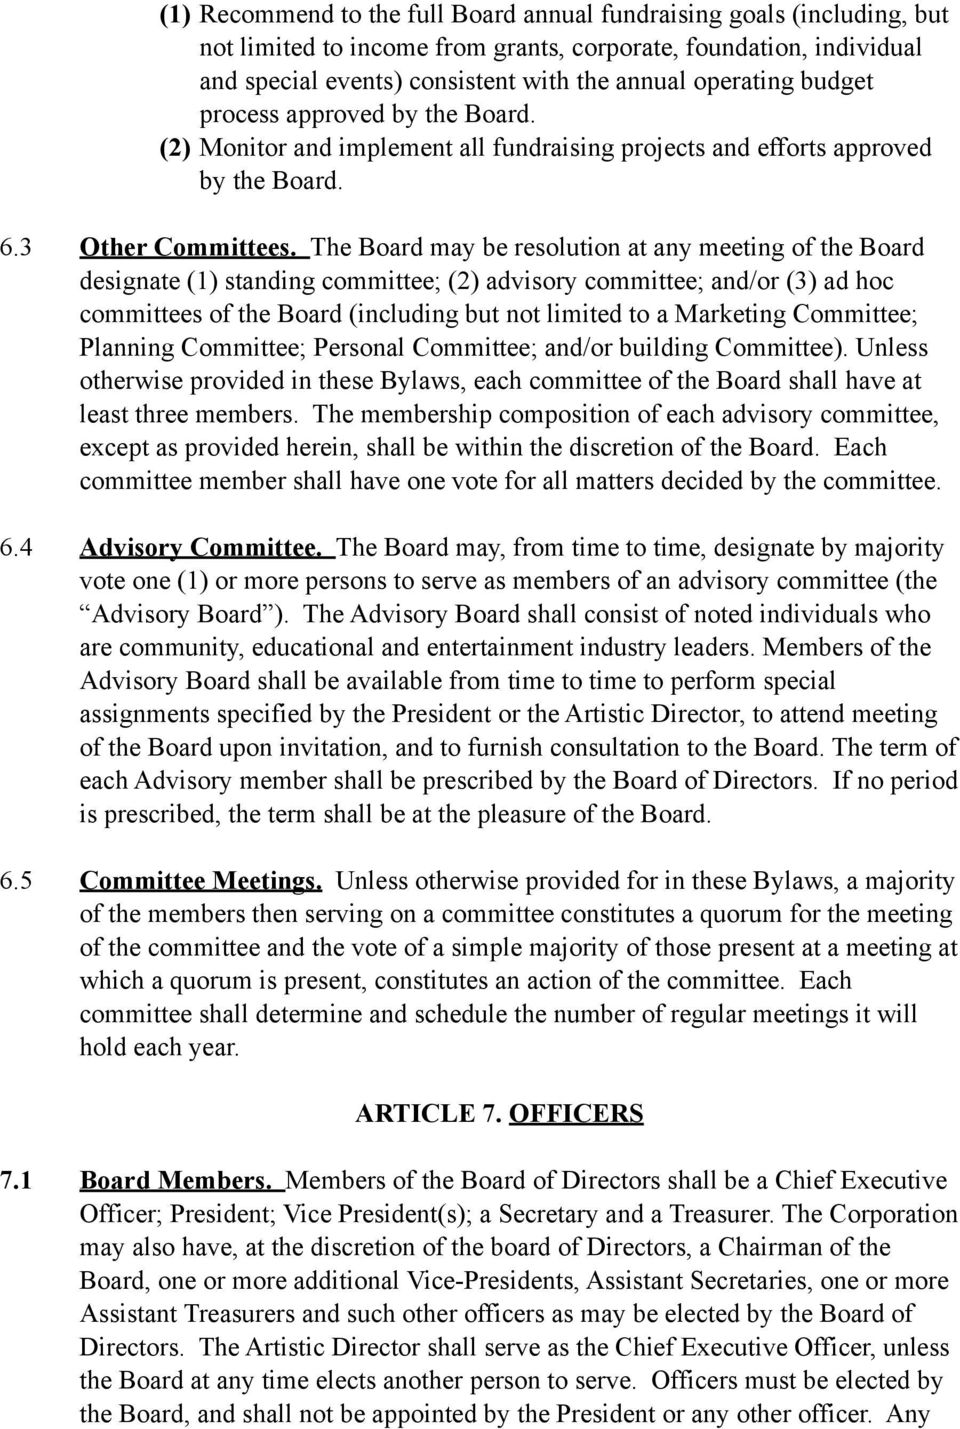 The Board may be resolution at any meeting of the Board designate (1) standing committee; (2) advisory committee; and/or (3) ad hoc committees of the Board (including but not limited to a Marketing